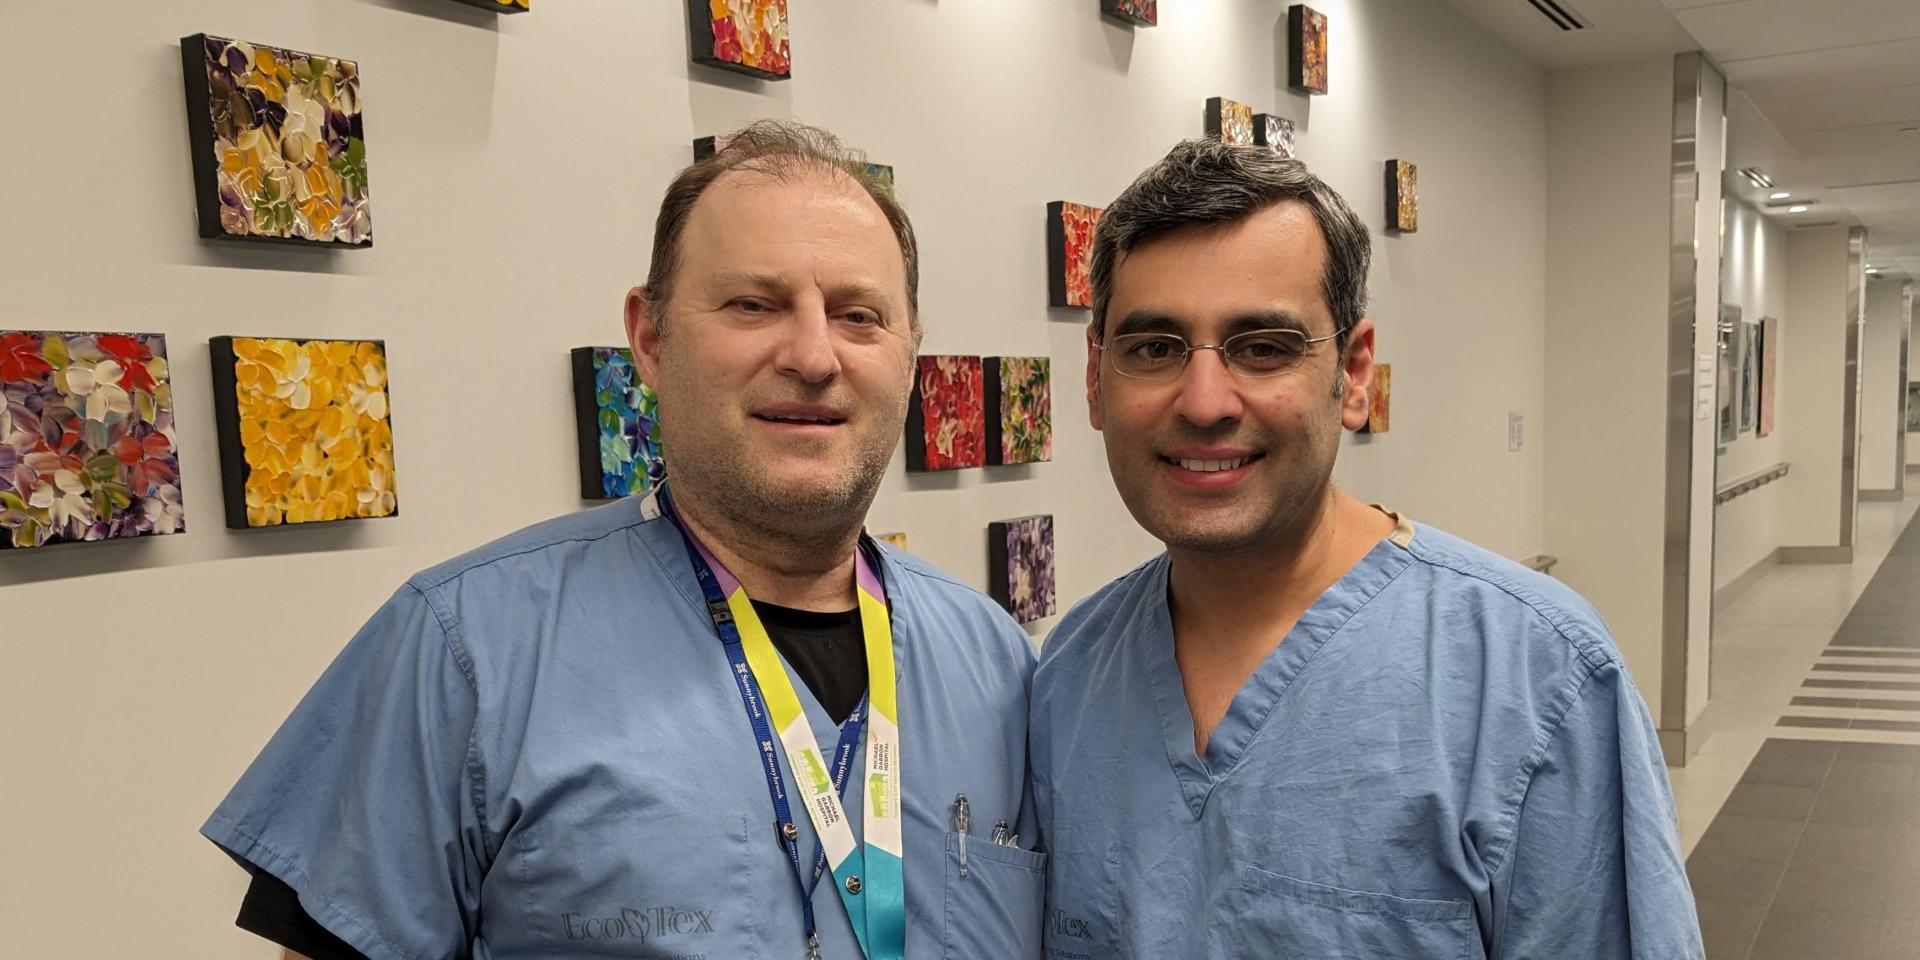 Dr. Lawrence Weisbrod and Dr. Mohammad Zia